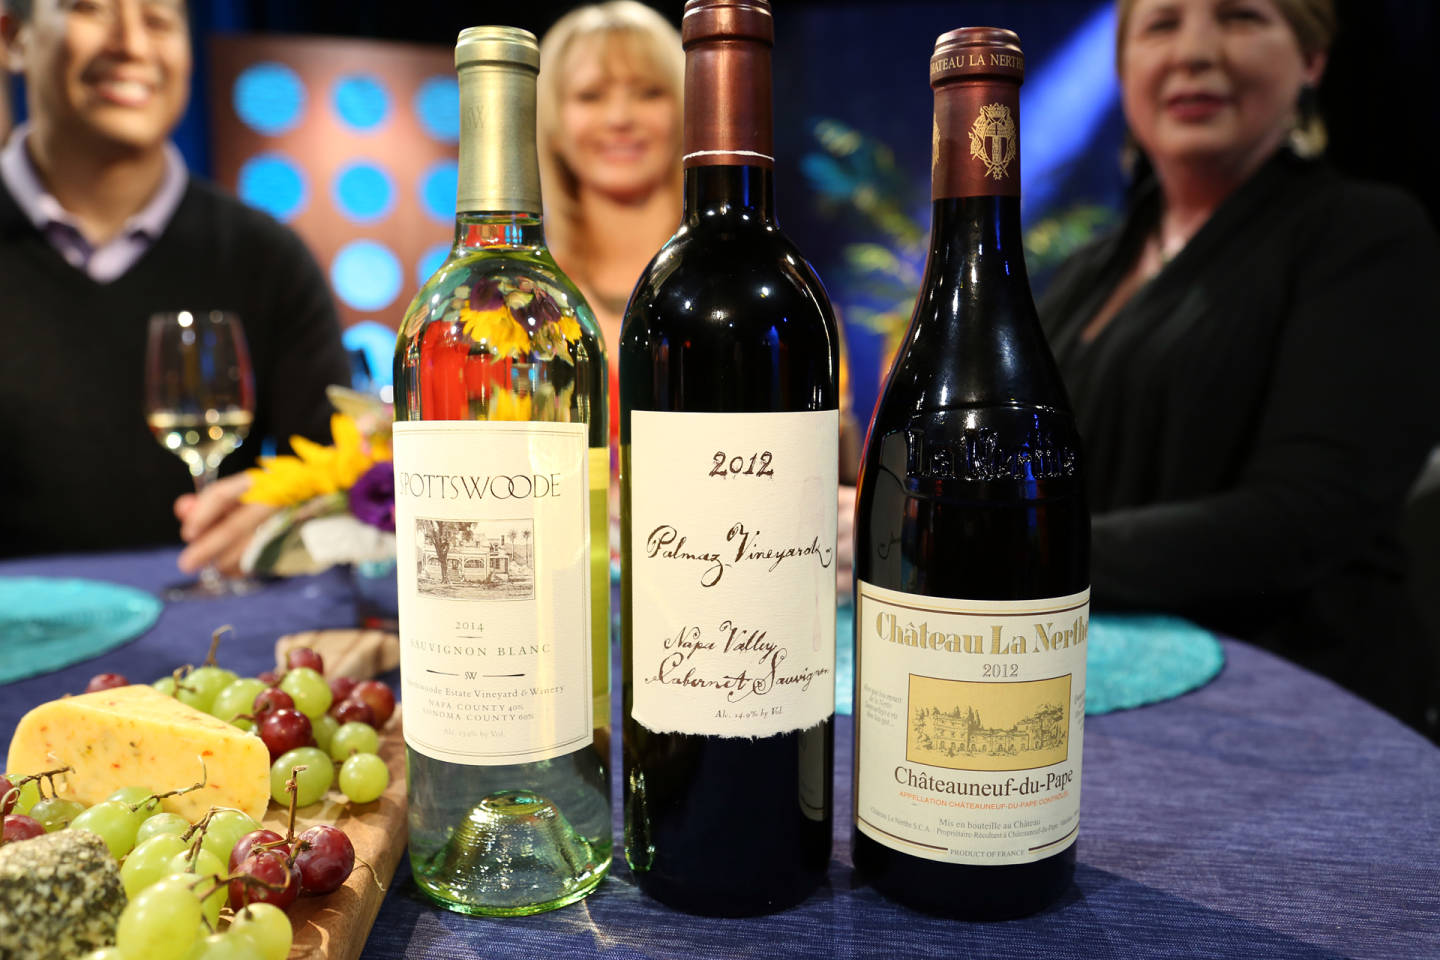 Wines that guests drank on the set of the premiere episode of Check, Please! Bay Area season 11 included a Spottswoode Sauvignon Blanc.